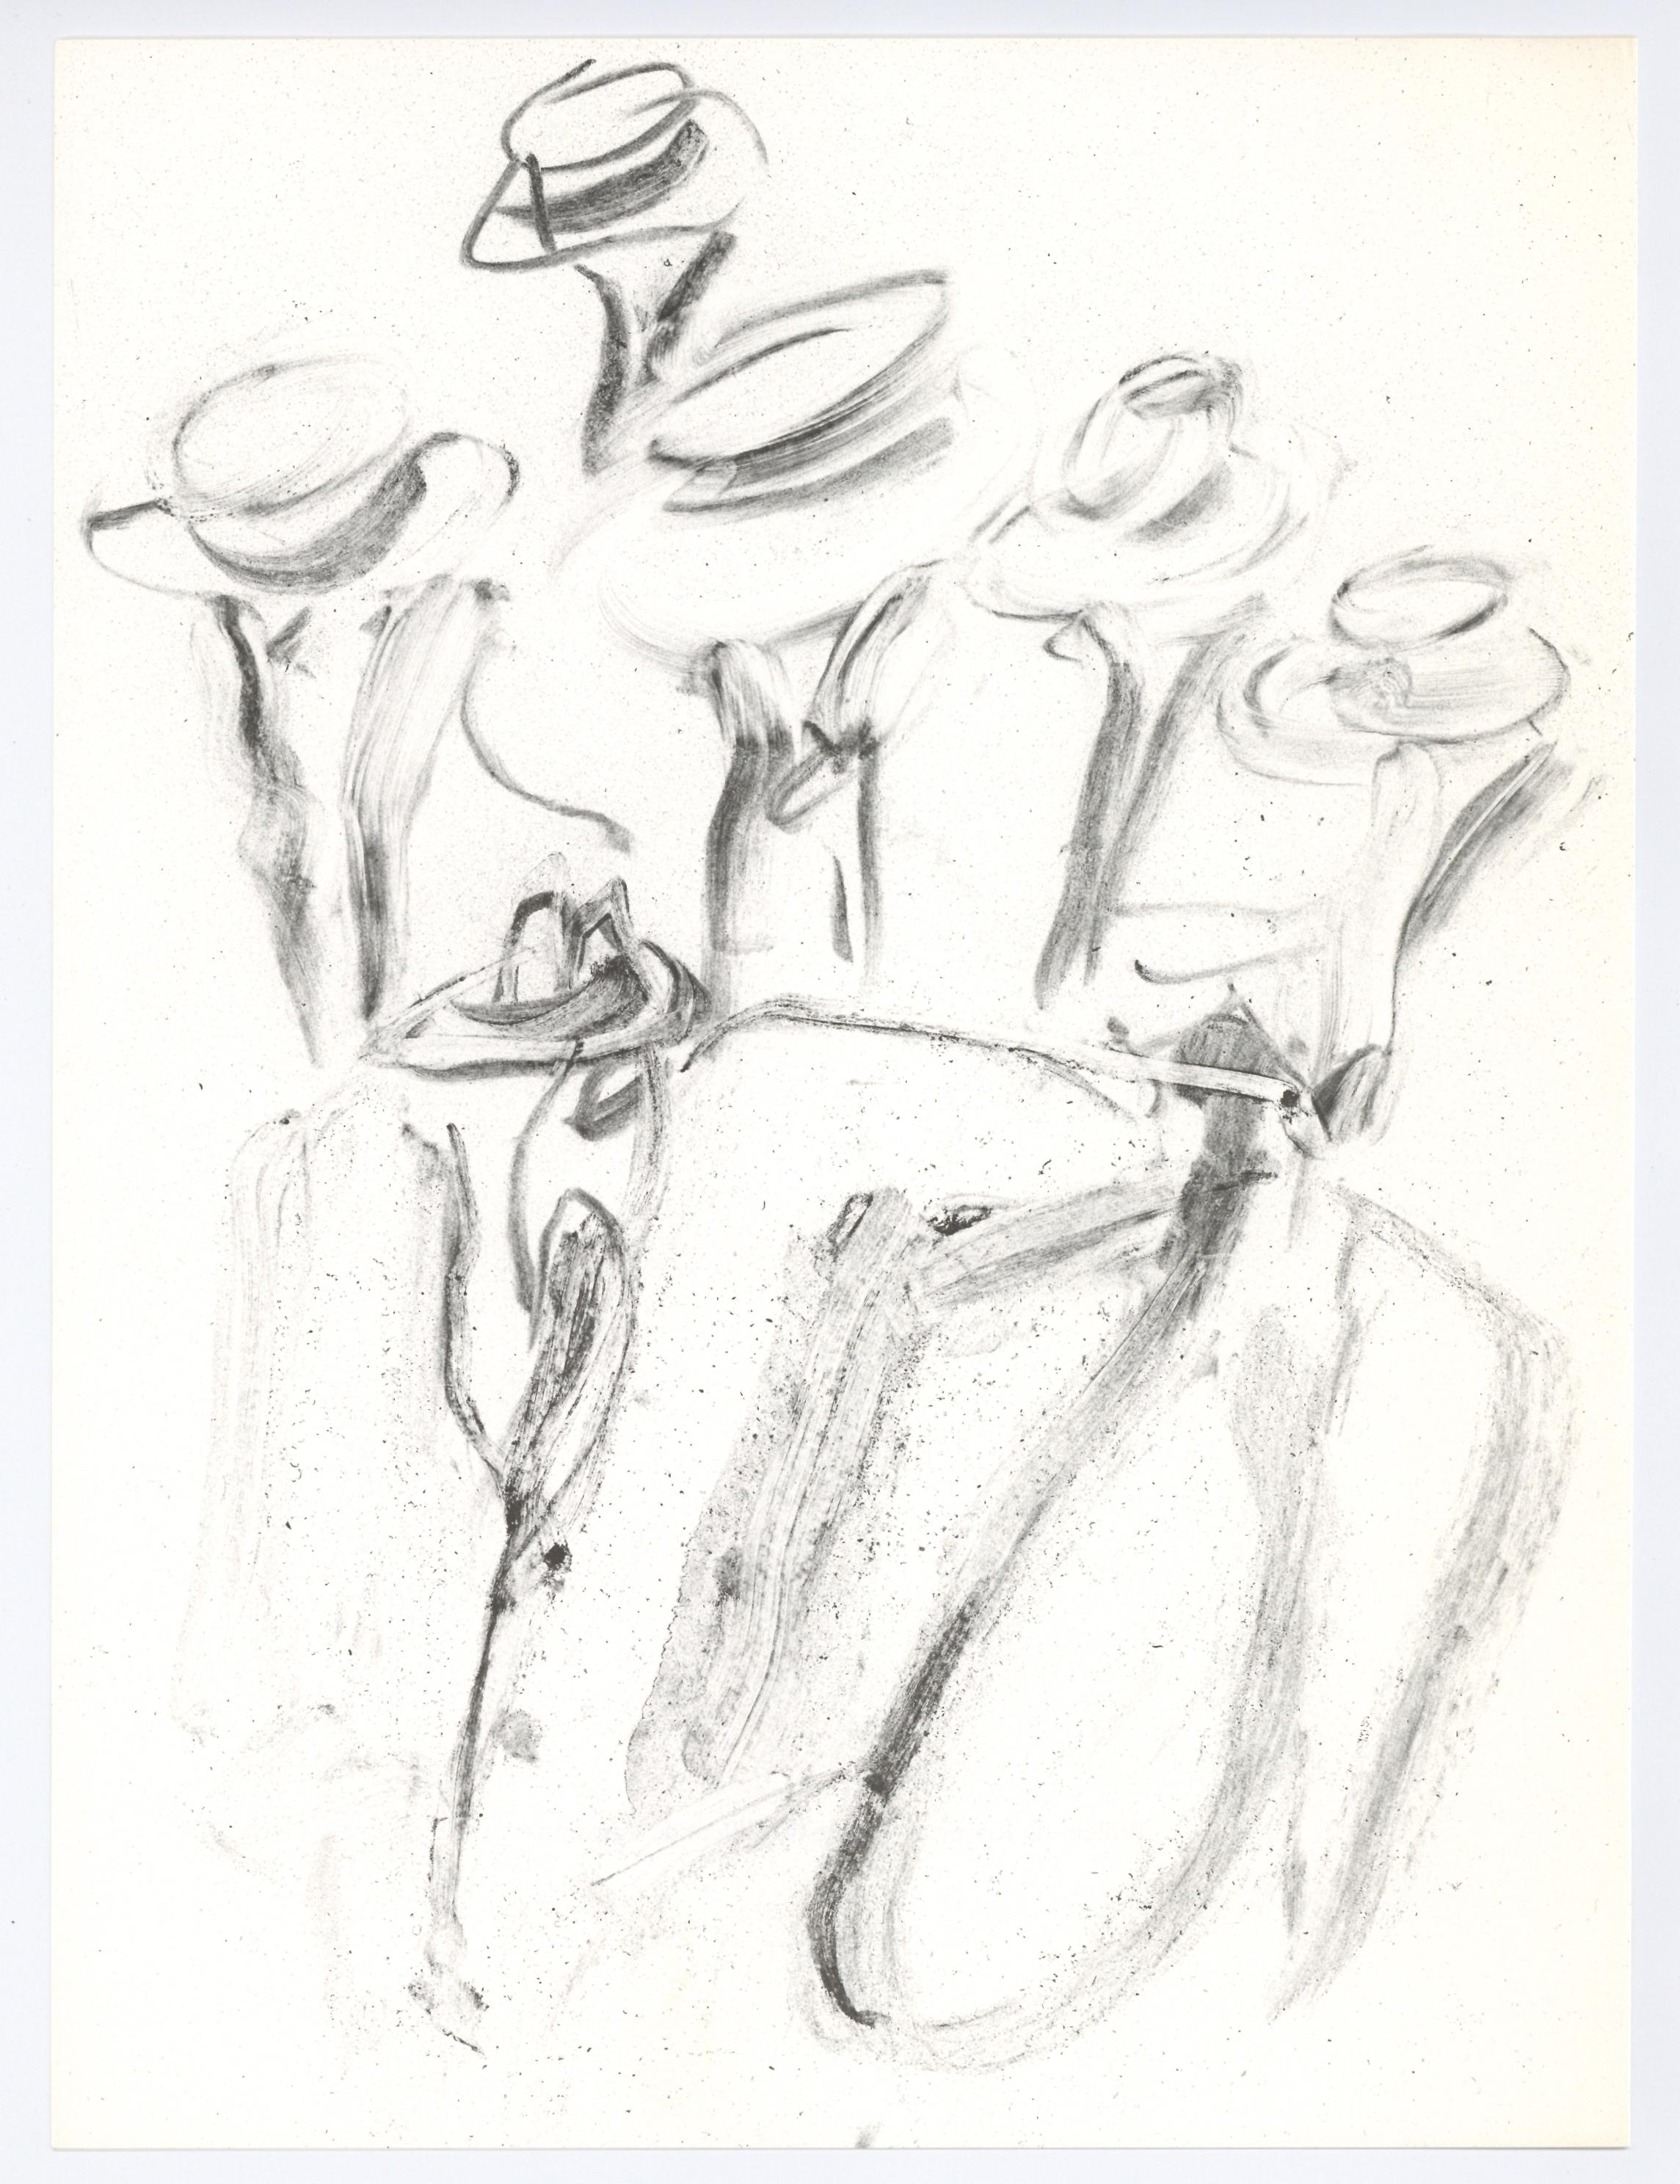 Medium: lithograph. From the "In Memory of My Feelings" portfolio, printed in 1967 on Mohawk Superfine Smooth paper in a limited edition of 2500 and published in New York by The Museum of Modern Art. Not signed. 

Willem de Kooning was one of the